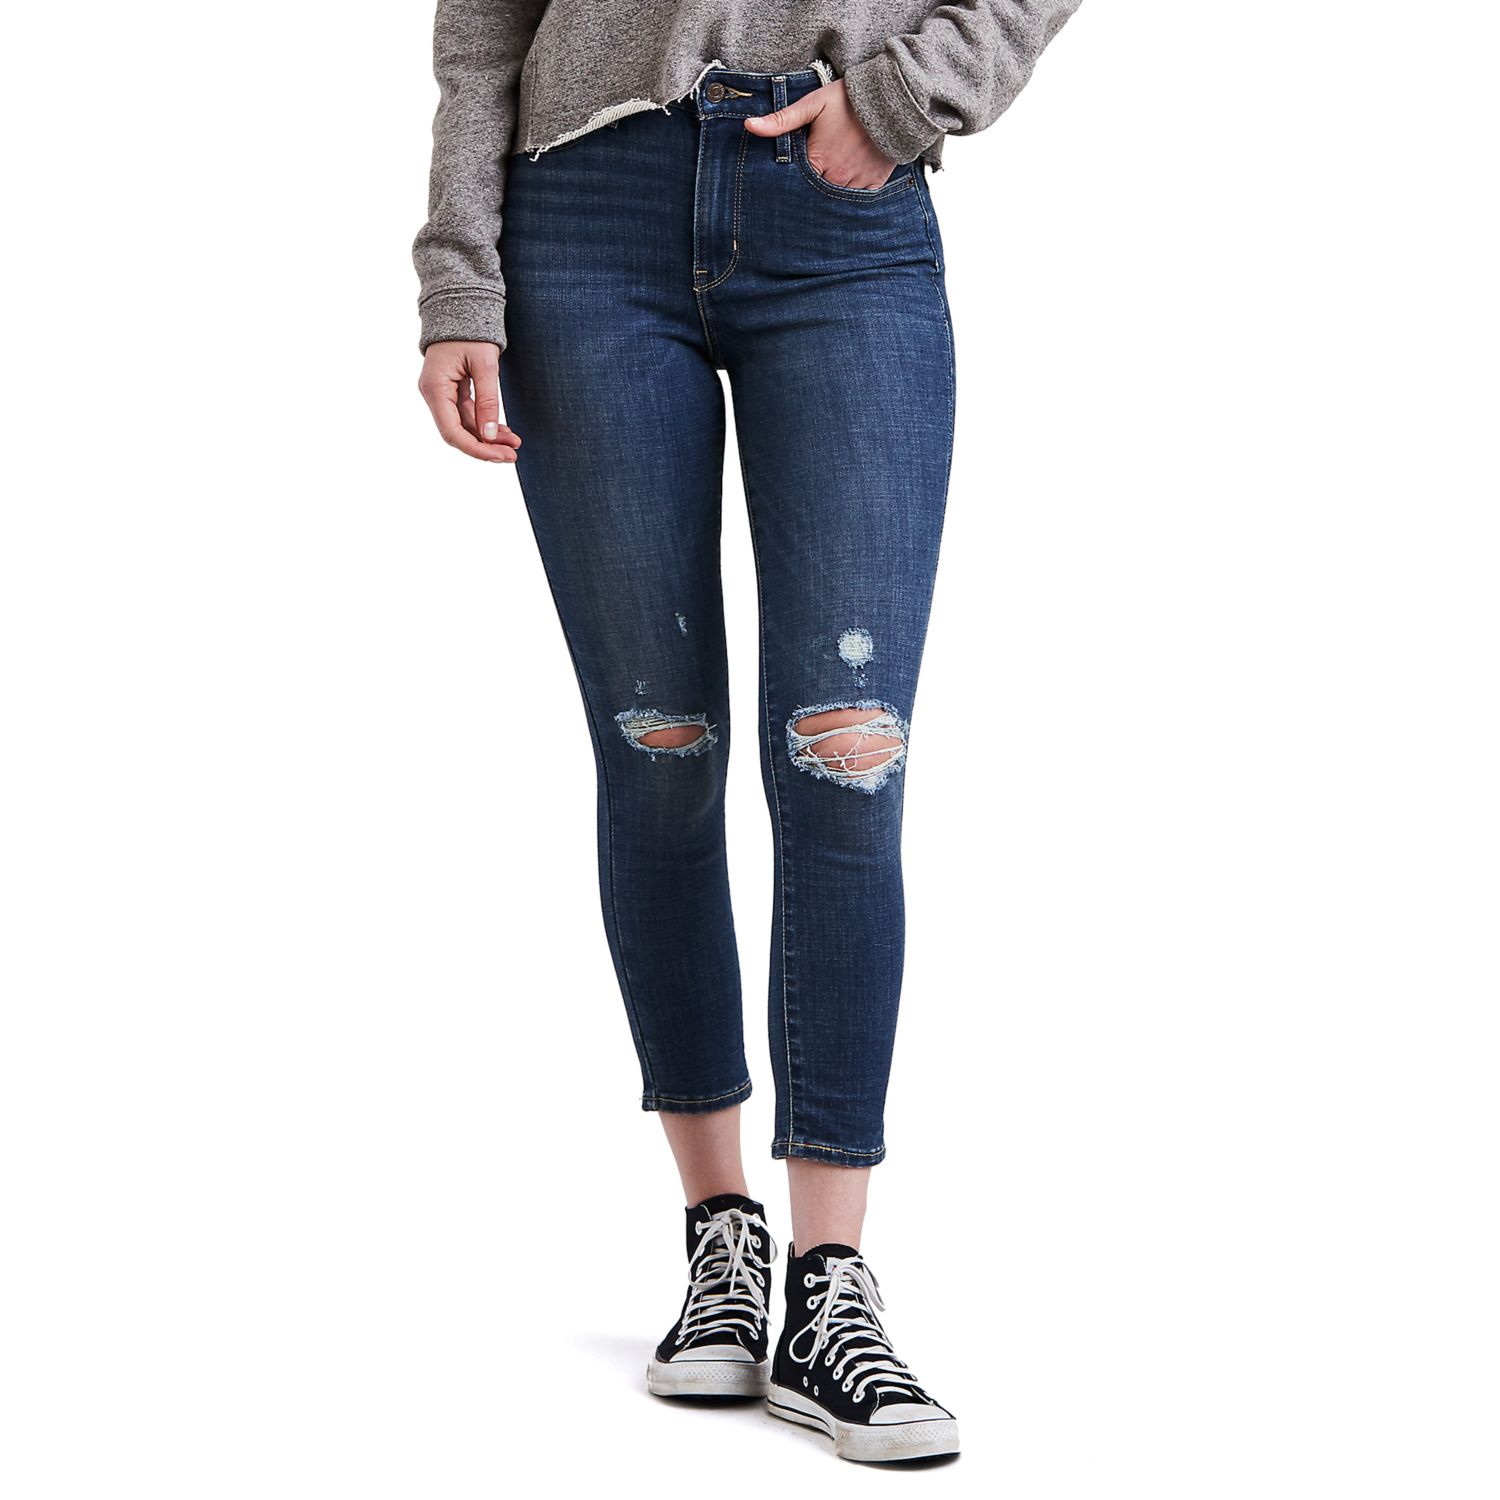 levi's high rise skinny ankle jeans